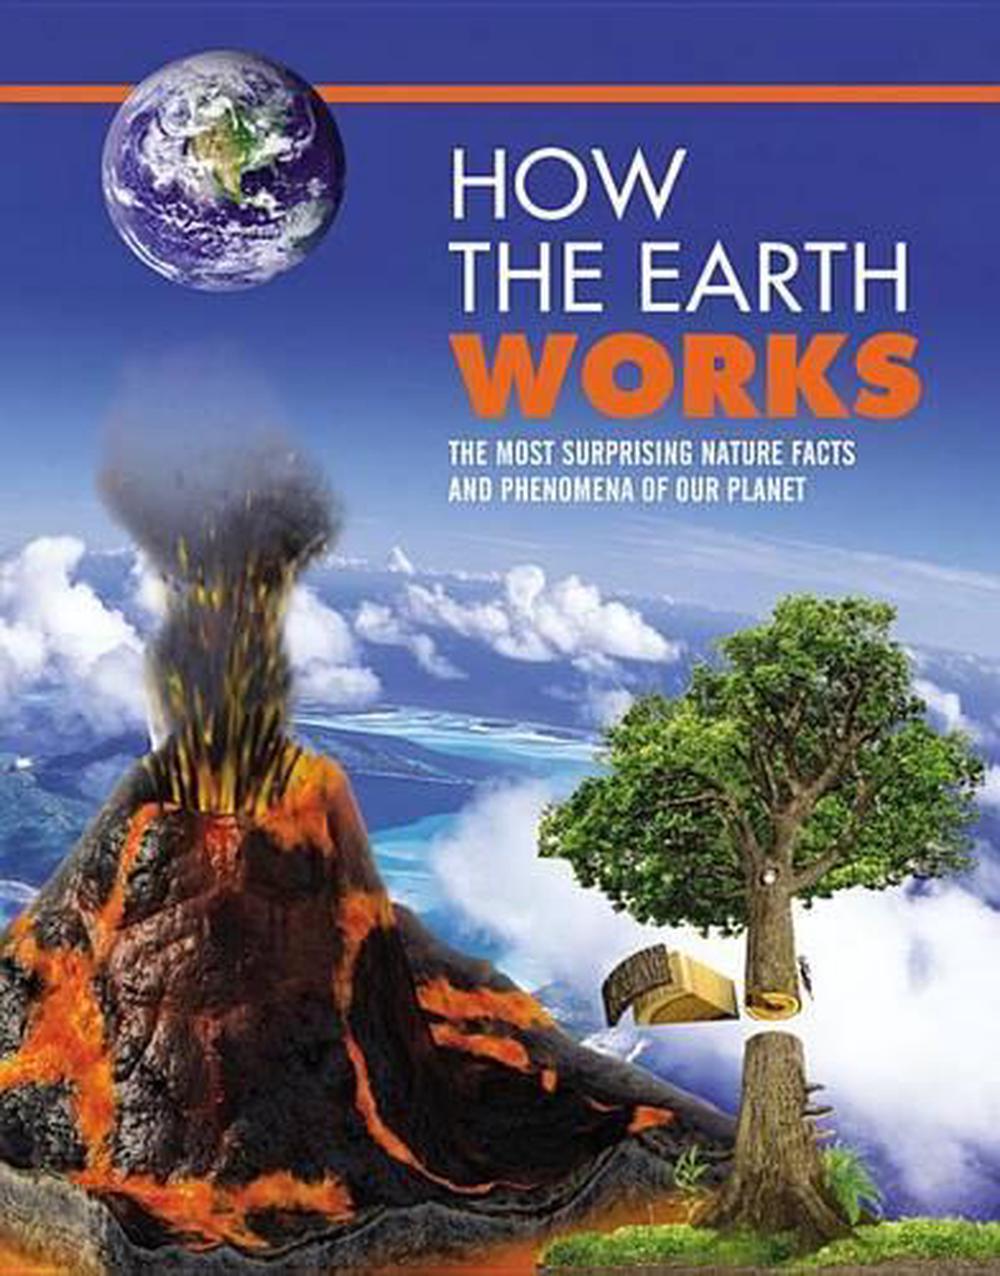 88  A Way To Help Planet Earth Book with Best Writers